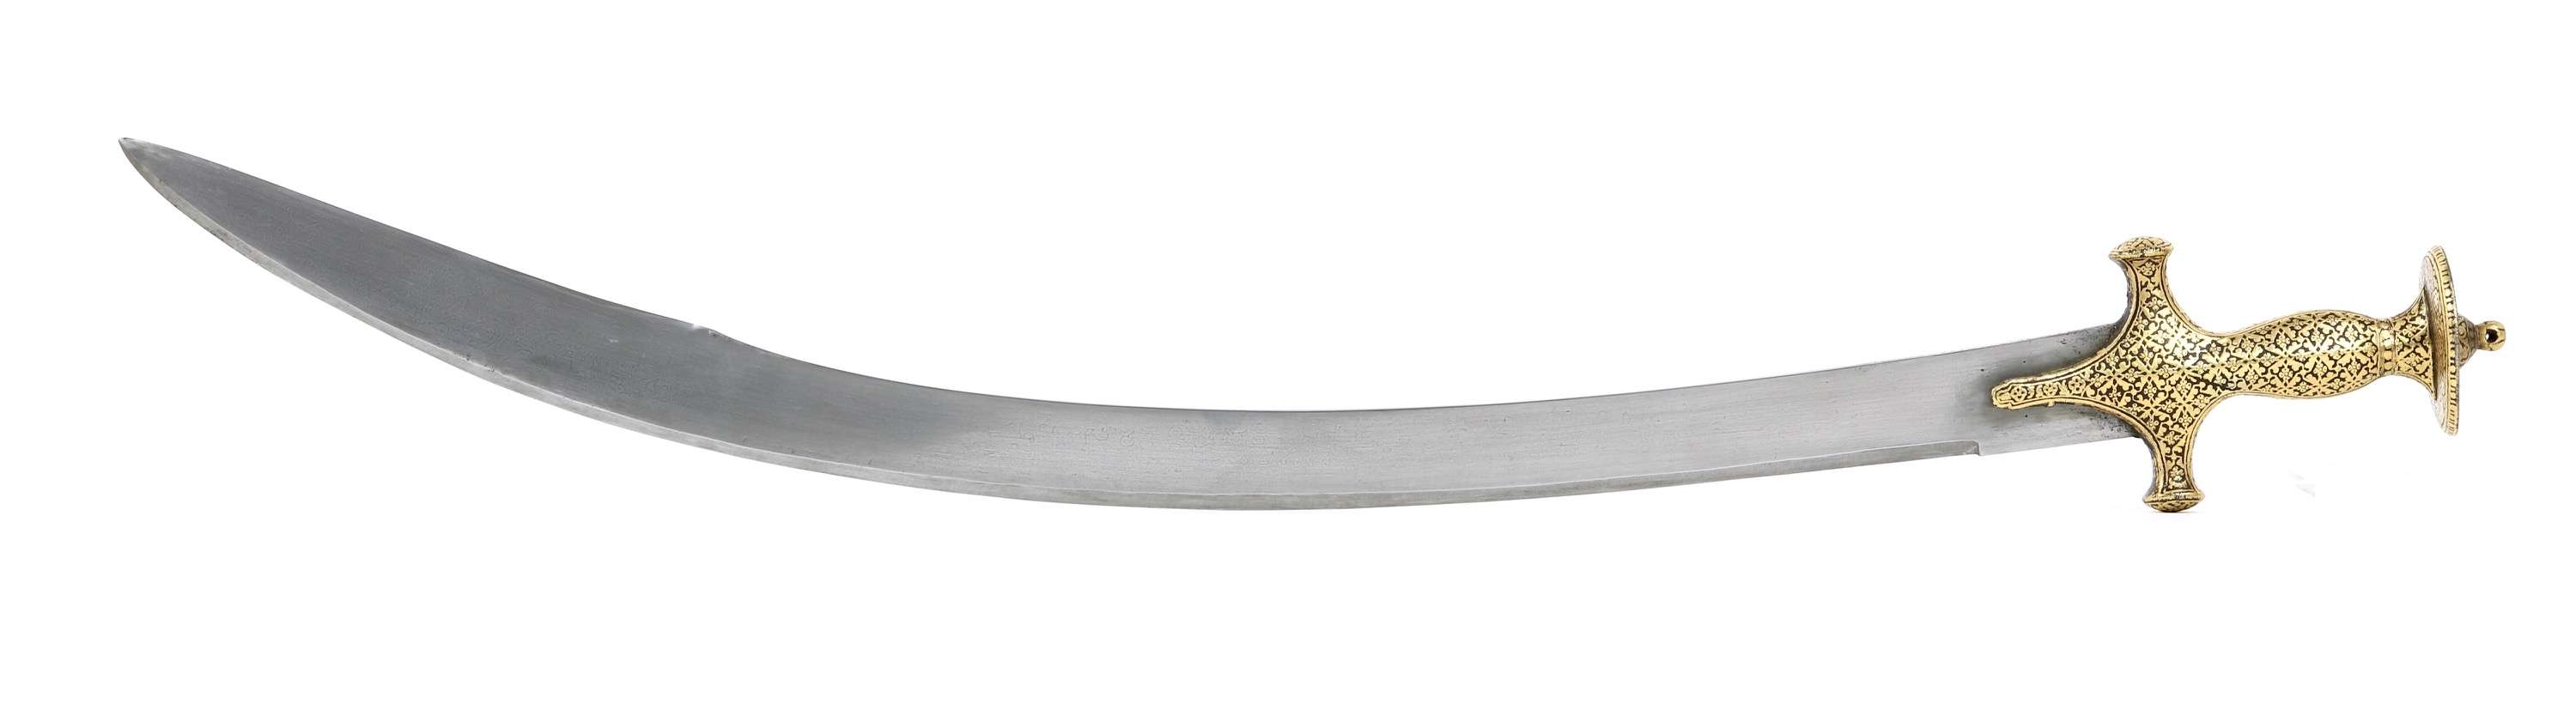 Fine dated talwar from Ratlam with Mamluk style blade